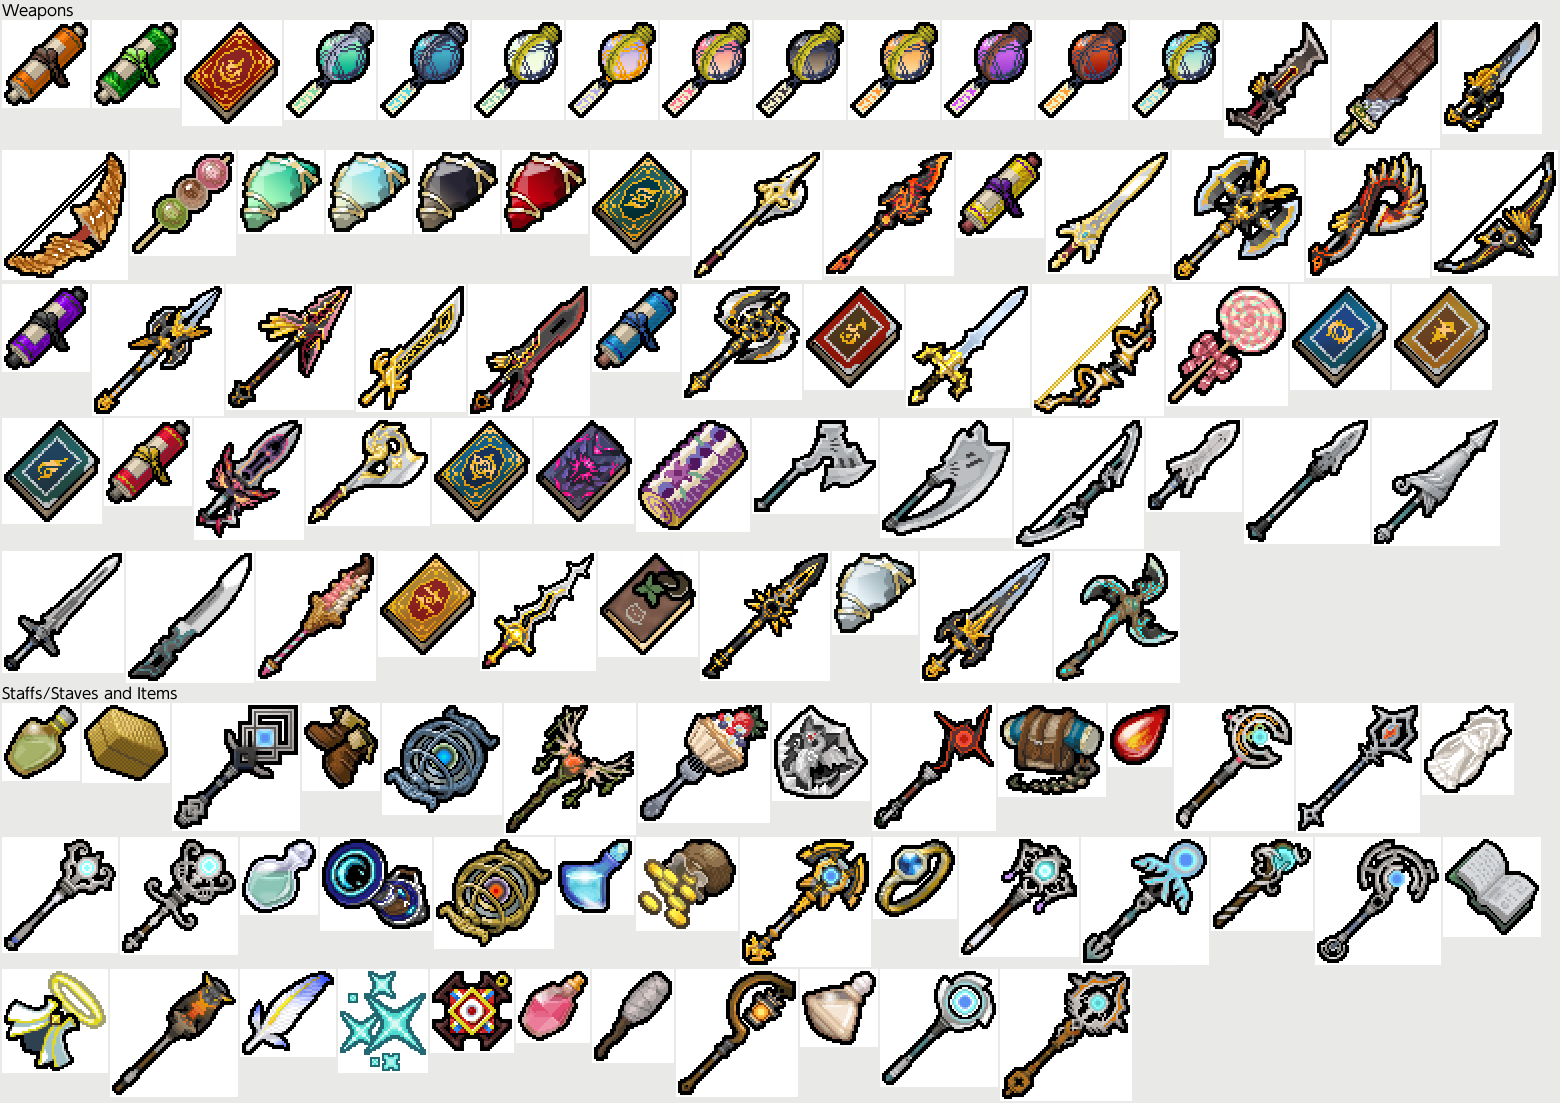 Stamps - Weapons + Items